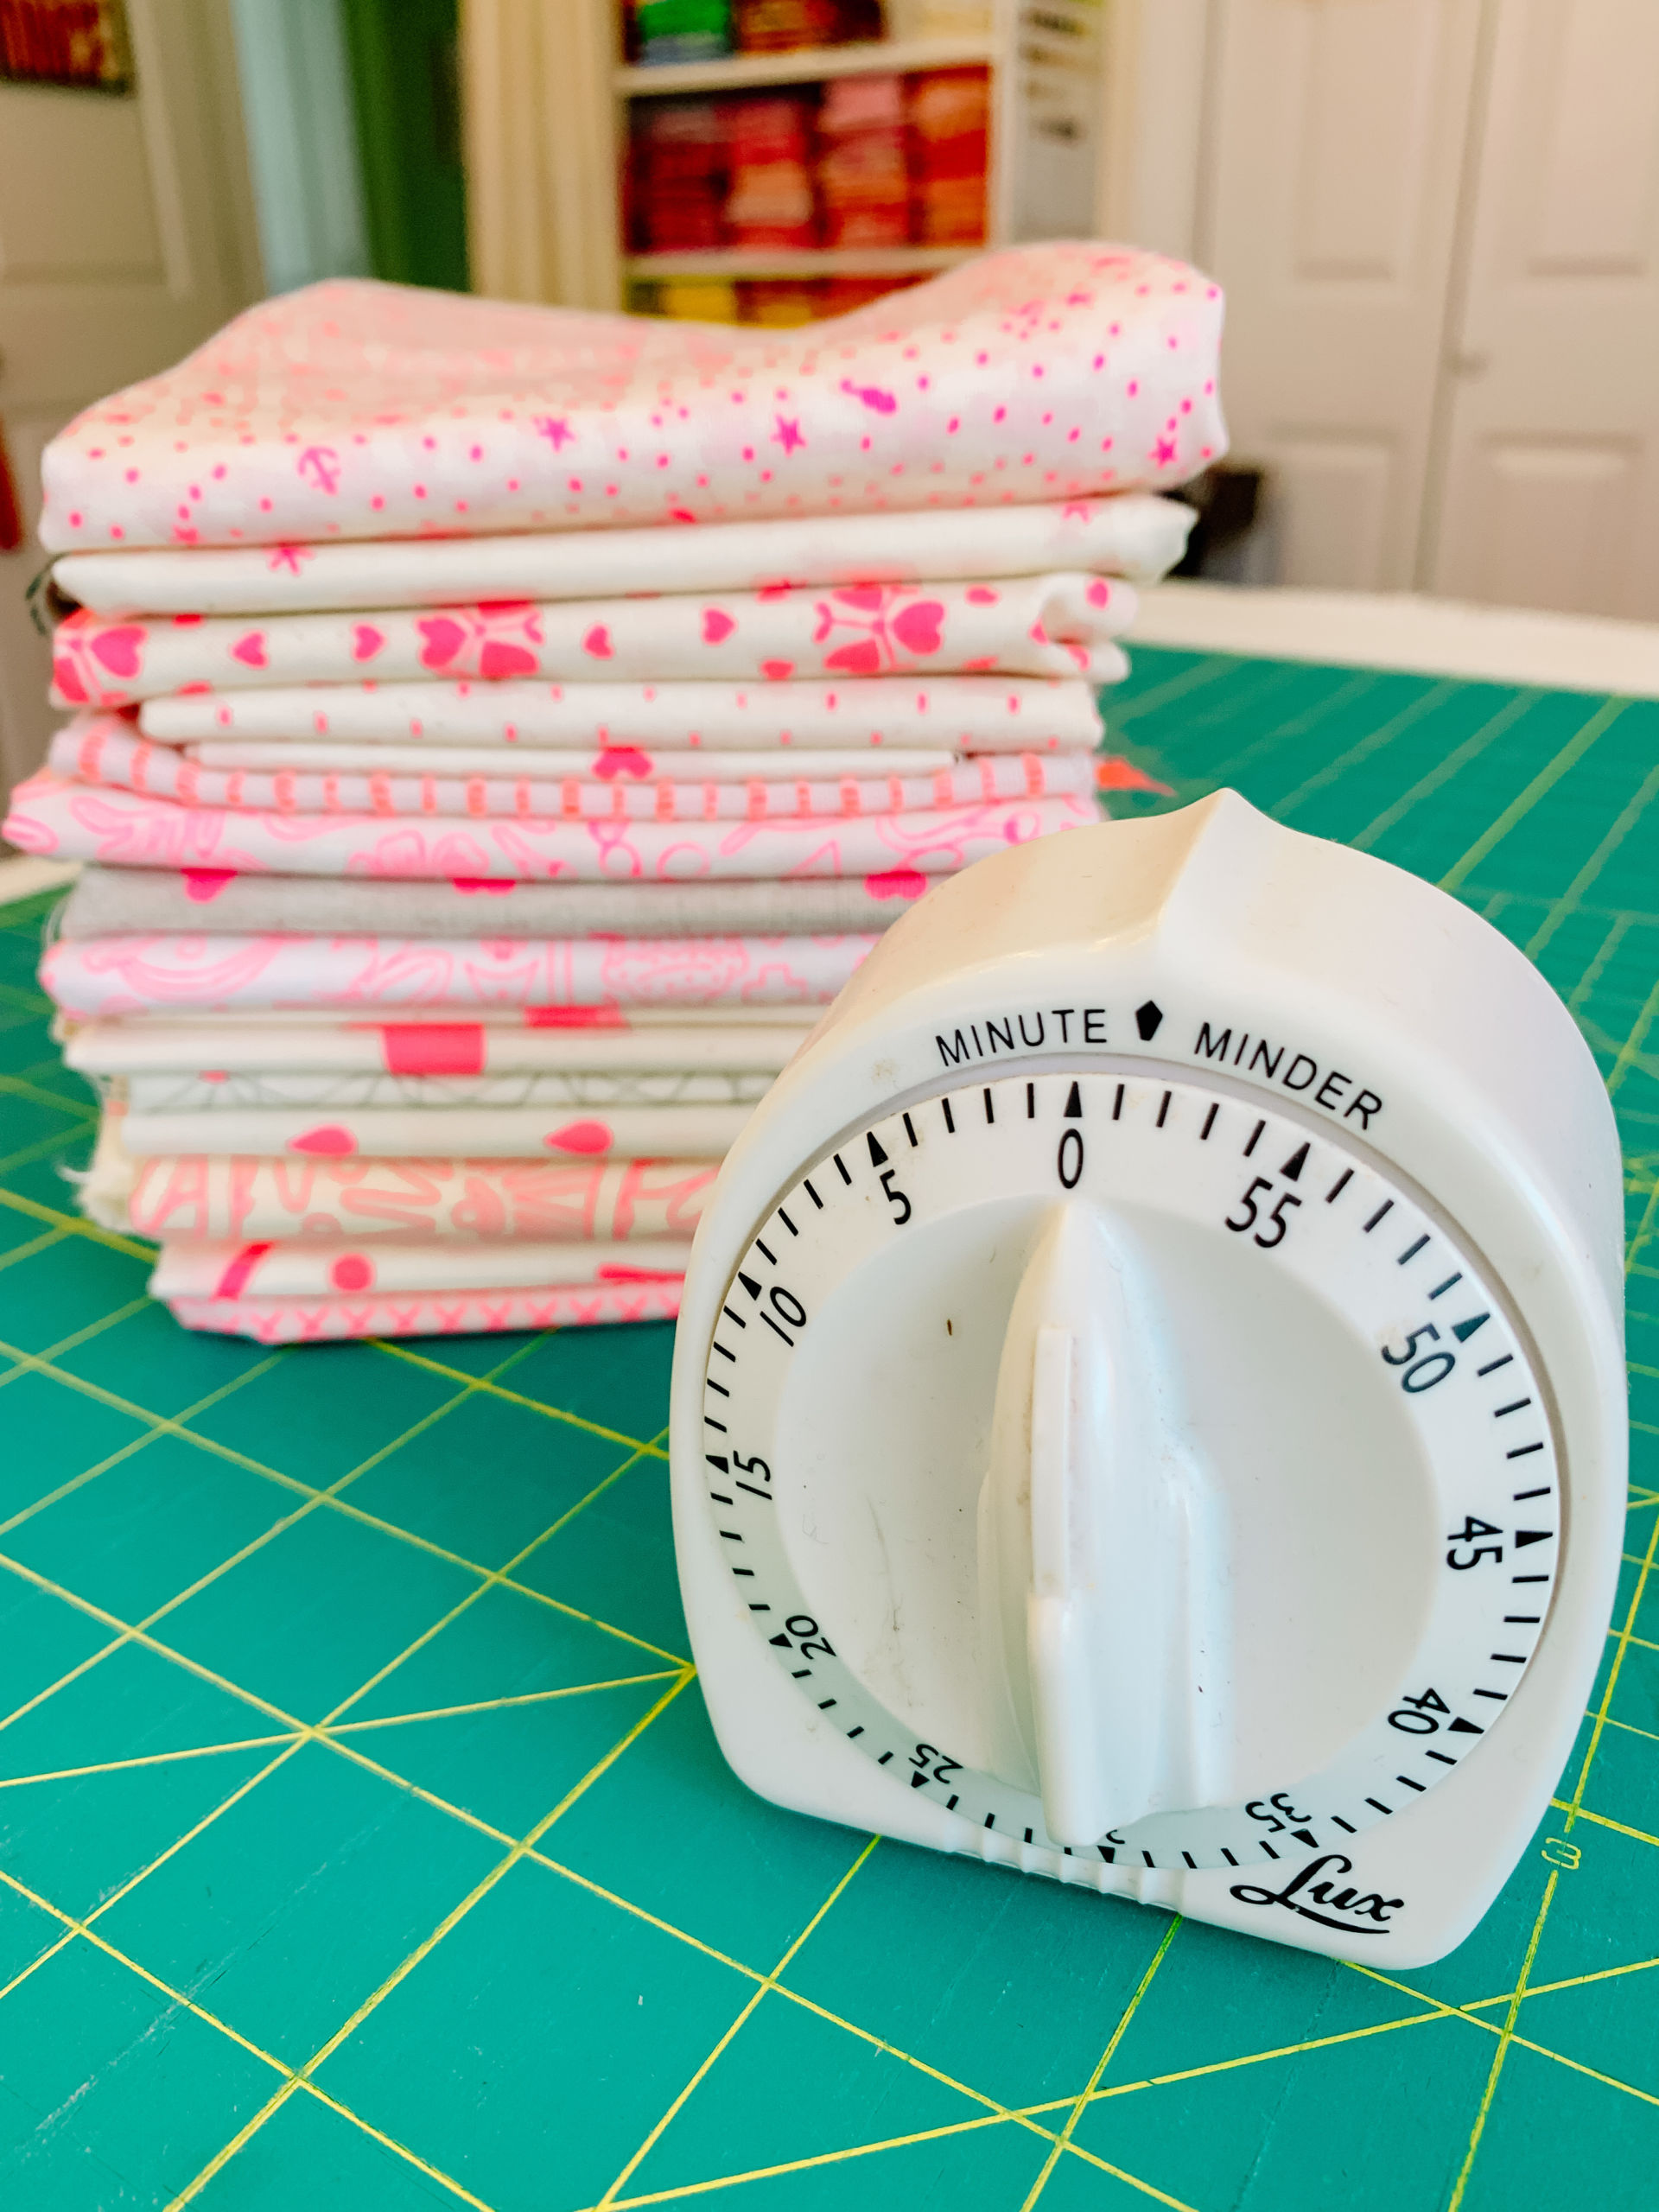 Quilting is our passion, and it can cause frustration when pain makes it challenging. That’s why we are thrilled to bring you a post all about tips for quilting with chronic pain and illness! suzyquilts.com #quilting #sewing